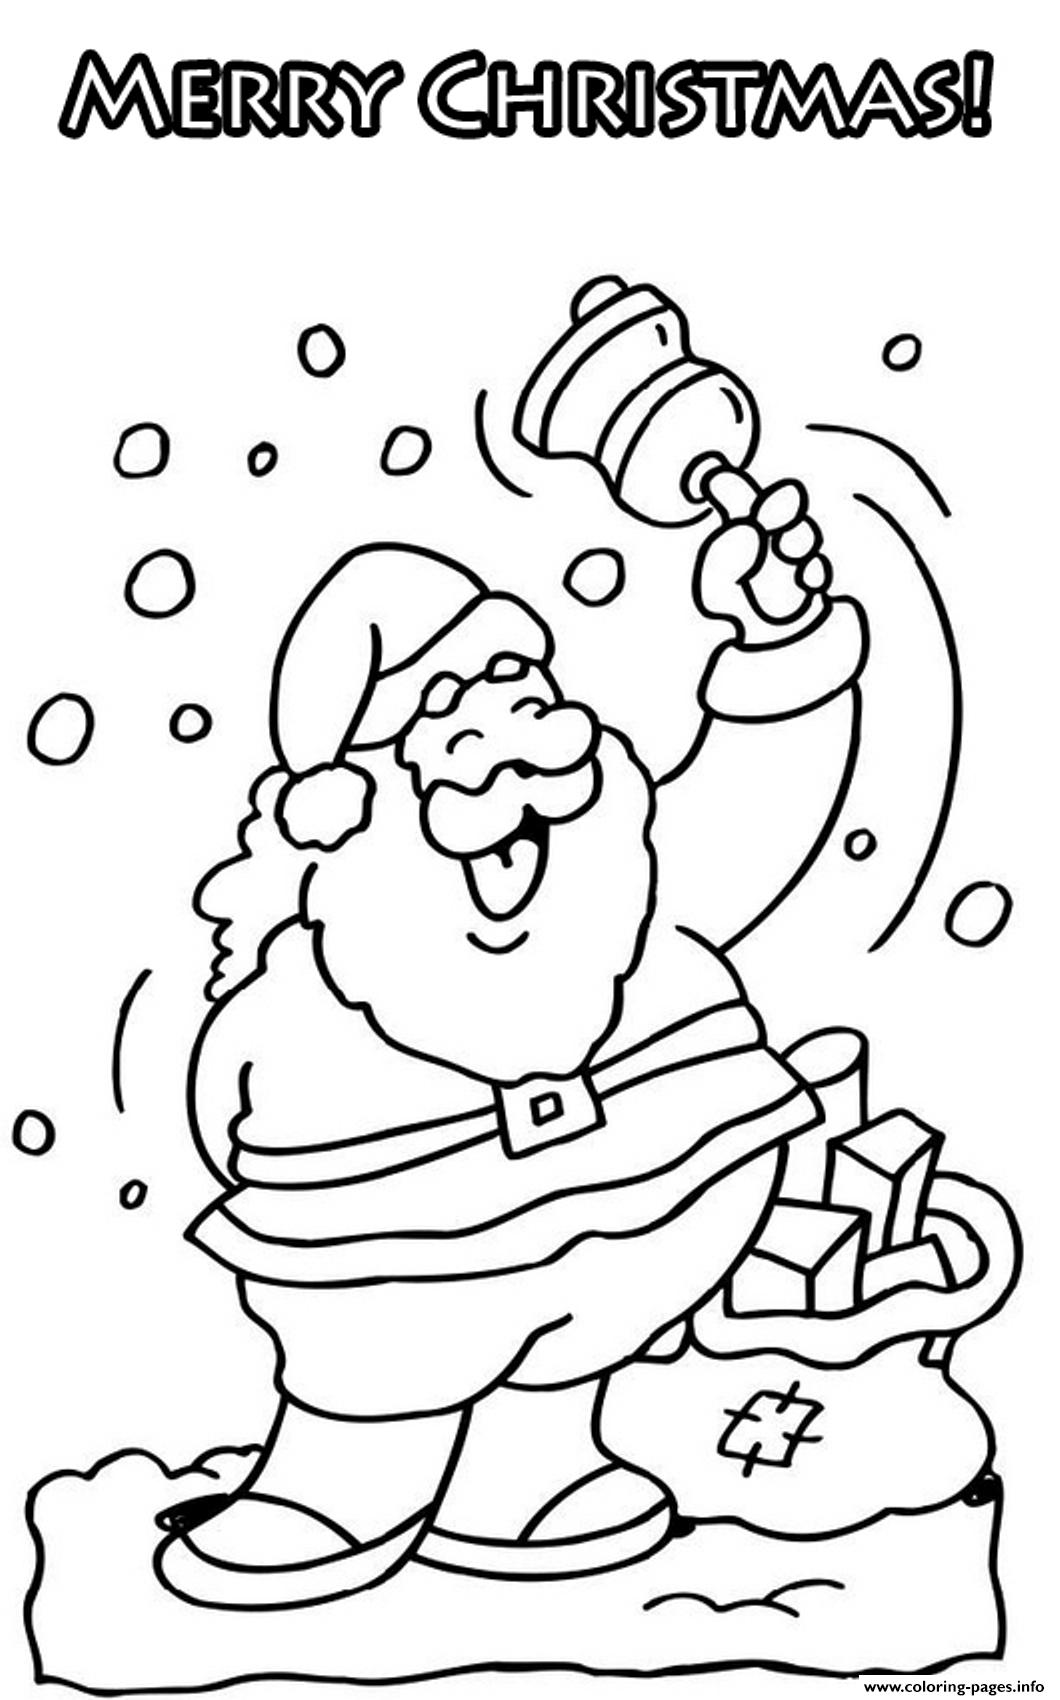 Coloring Pages For Merry Christmas Santa111d coloring